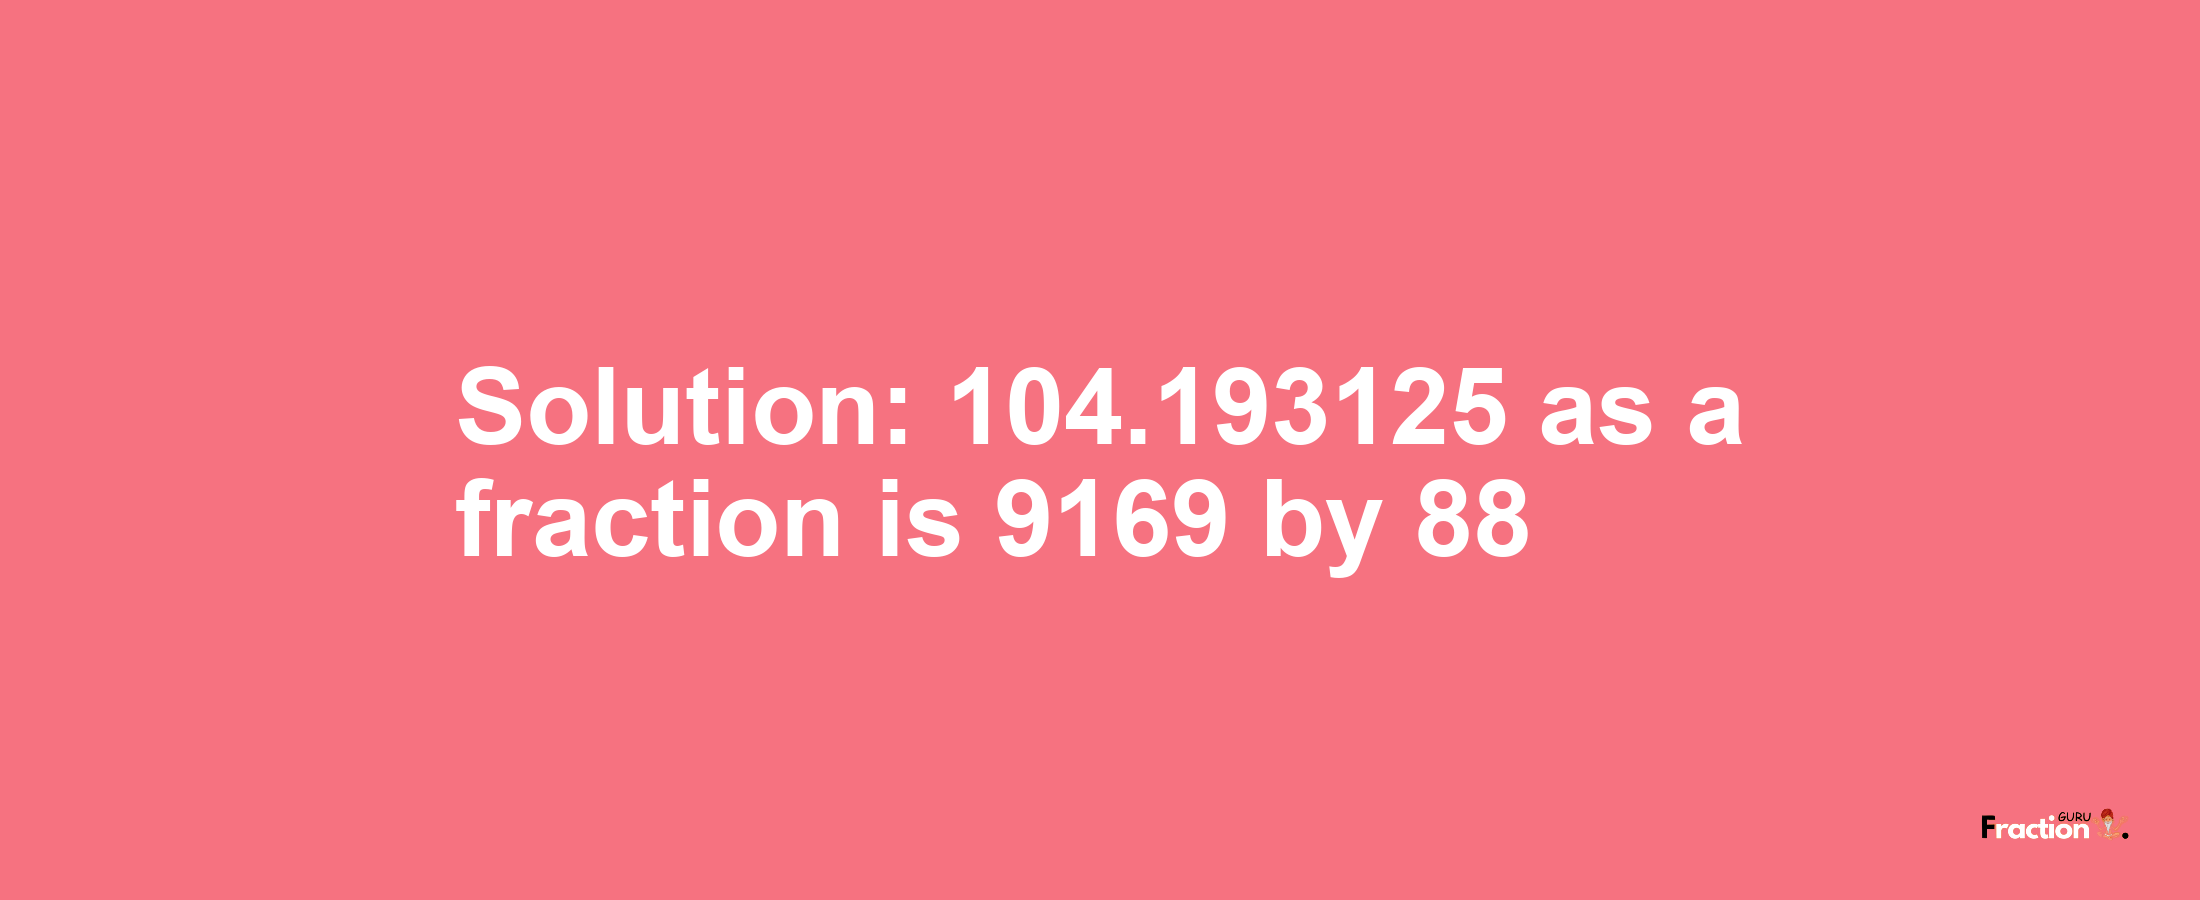 Solution:104.193125 as a fraction is 9169/88